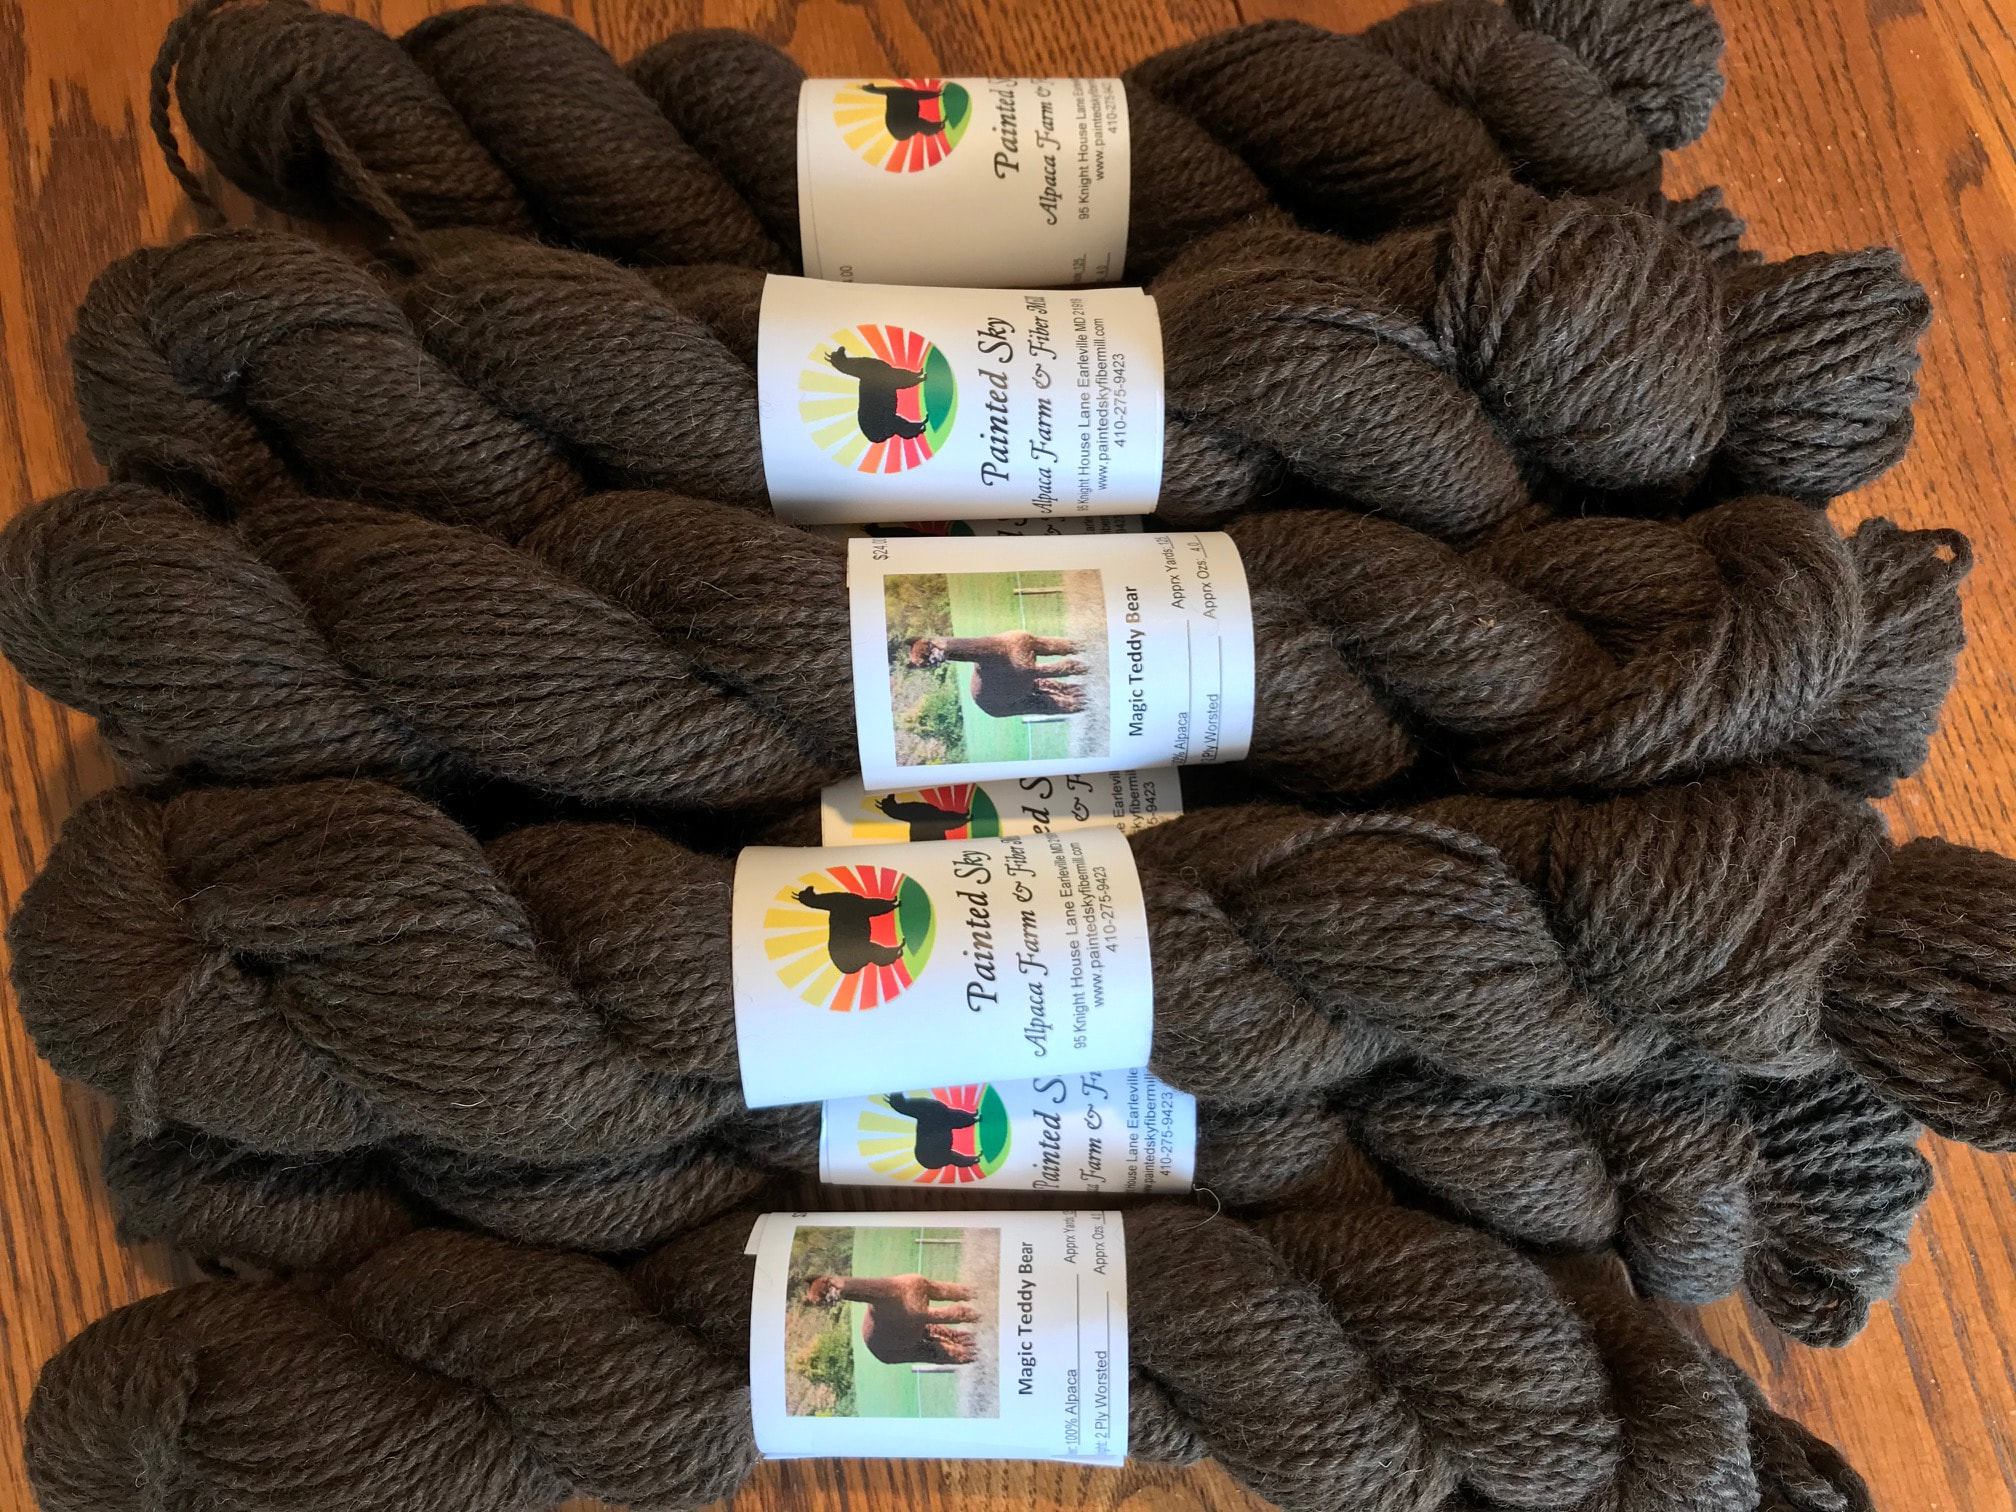 Download 100% Alpaca Worsted Weight Yarns in Natural Colors